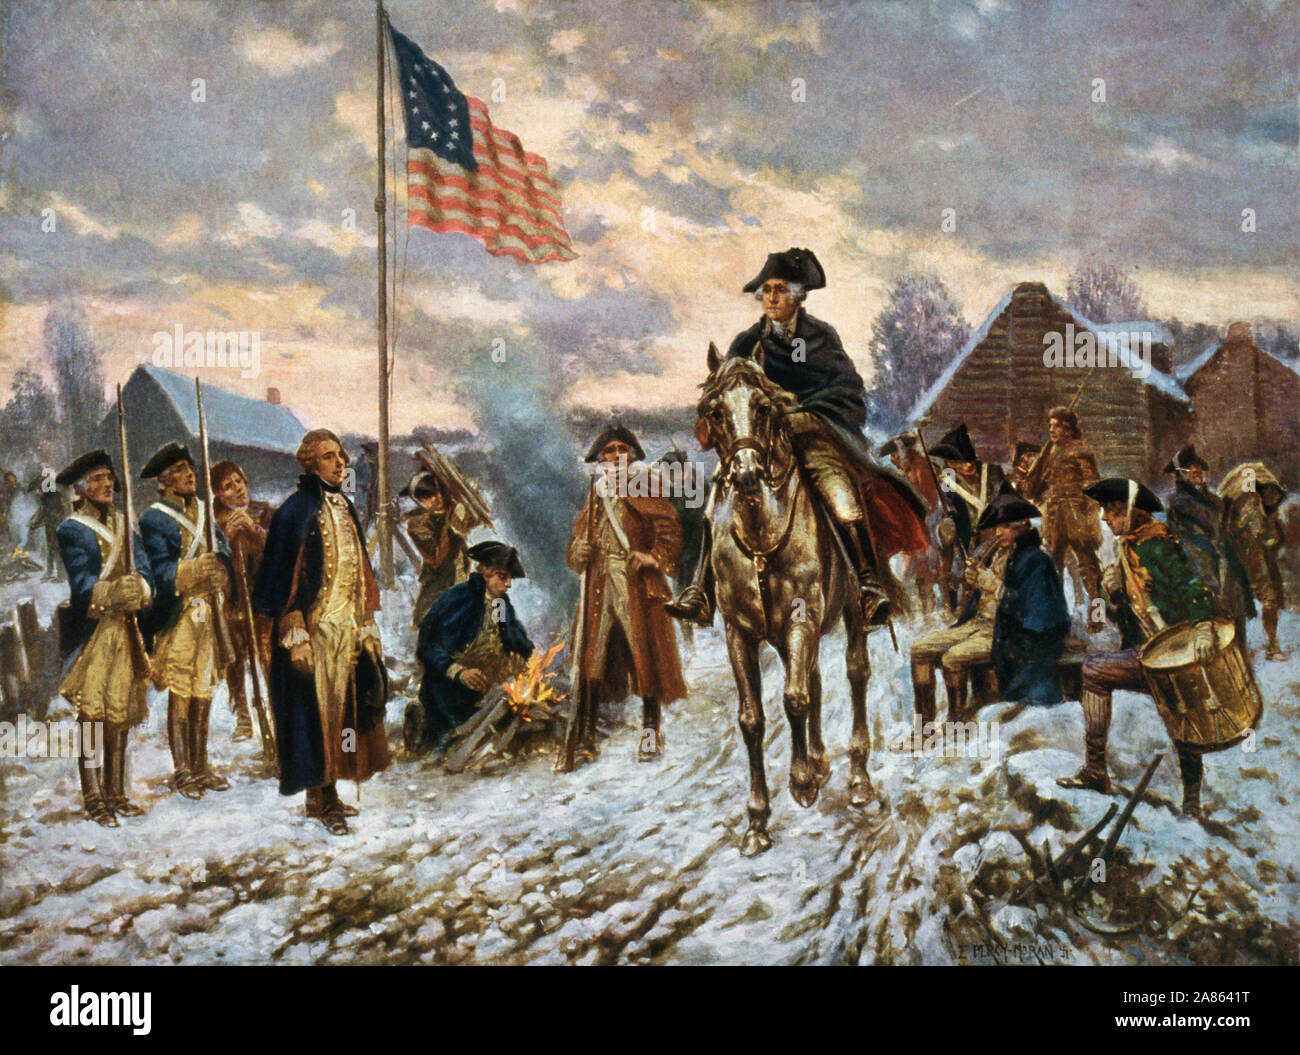 George Washington at Valley Forge during the American Revolutionary War.  George Washington, 1732 - 1799.  American political leader, military general, statesman, Founding Father and the first president of the United States.  After a work by E. Percy Moran. Stock Photo